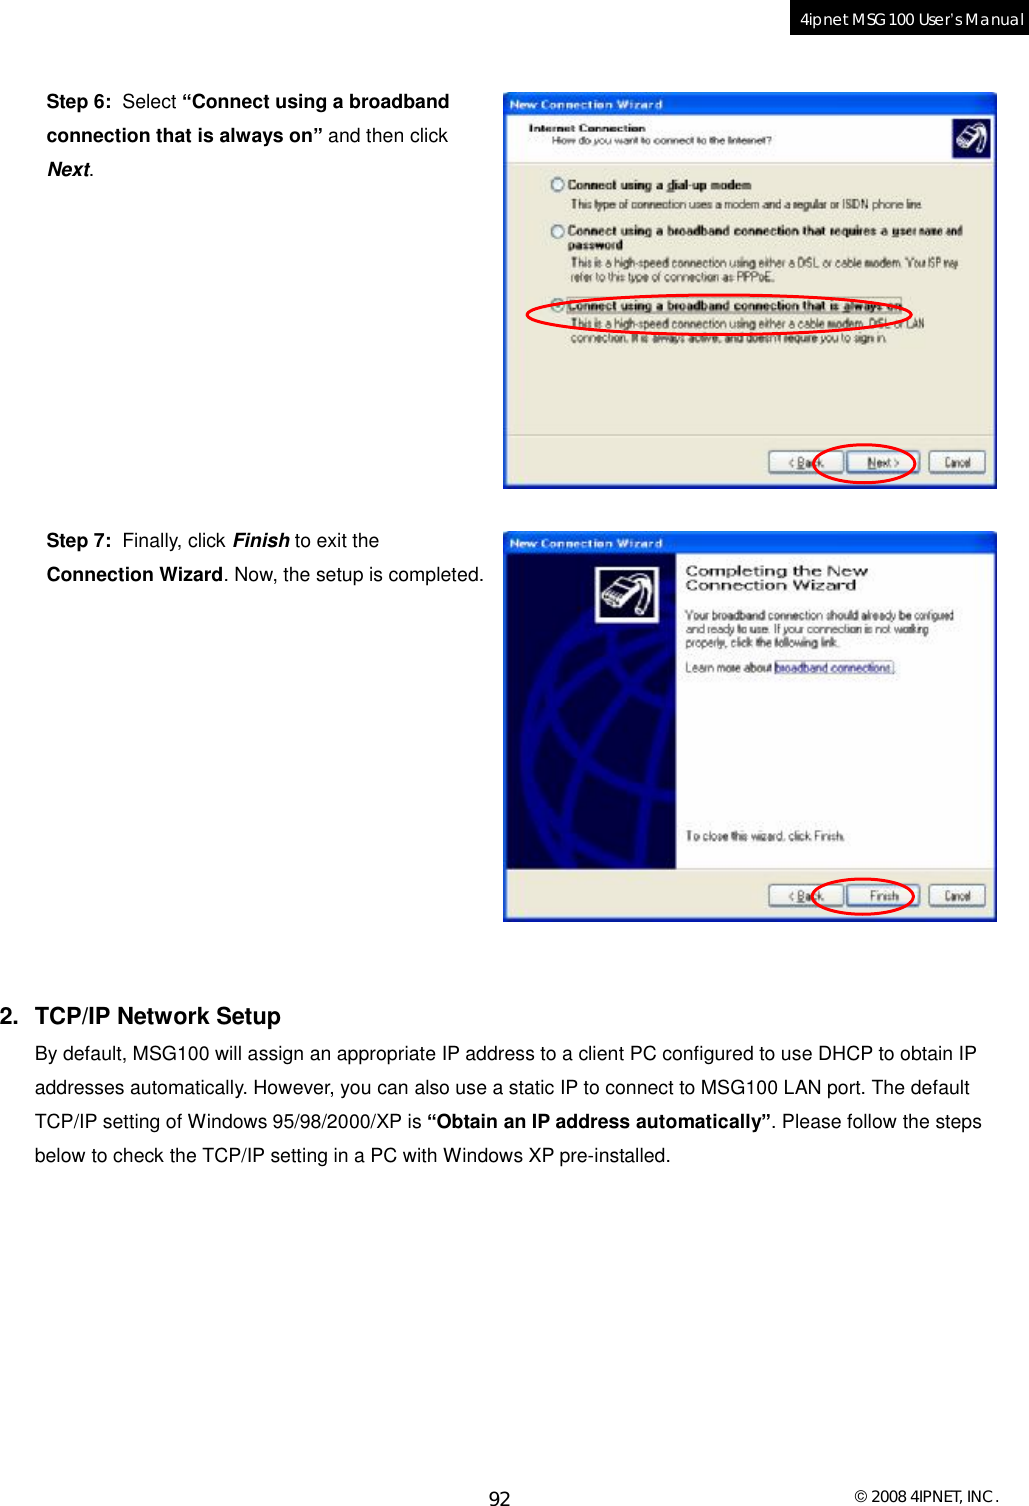  © 2008 4IPNET, INC. 92 4ipnet MSG100 User’s Manual   Step 6:  Select “Connect using a broadband connection that is always on” and then click Next.           Step 7:  Finally, click Finish to exit the Connection Wizard. Now, the setup is completed.             2. TCP/IP Network Setup By default, MSG100 will assign an appropriate IP address to a client PC configured to use DHCP to obtain IP addresses automatically. However, you can also use a static IP to connect to MSG100 LAN port. The default TCP/IP setting of Windows 95/98/2000/XP is “Obtain an IP address automatically”. Please follow the steps below to check the TCP/IP setting in a PC with Windows XP pre-installed.